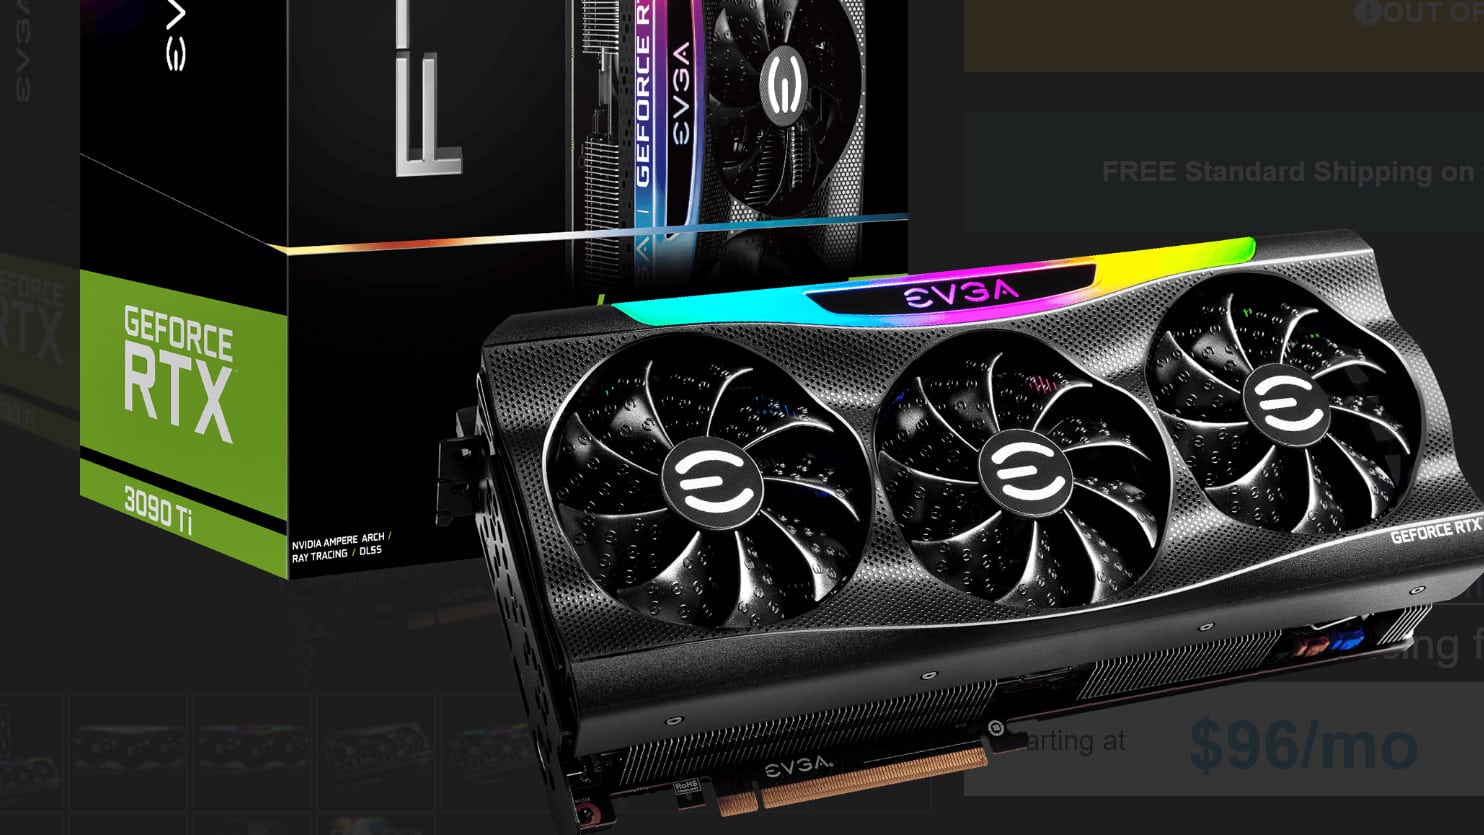 Amazon Prime Day: the best deals on video cards with discounts over 1000 euros on GeForce RTX 3090 Ti